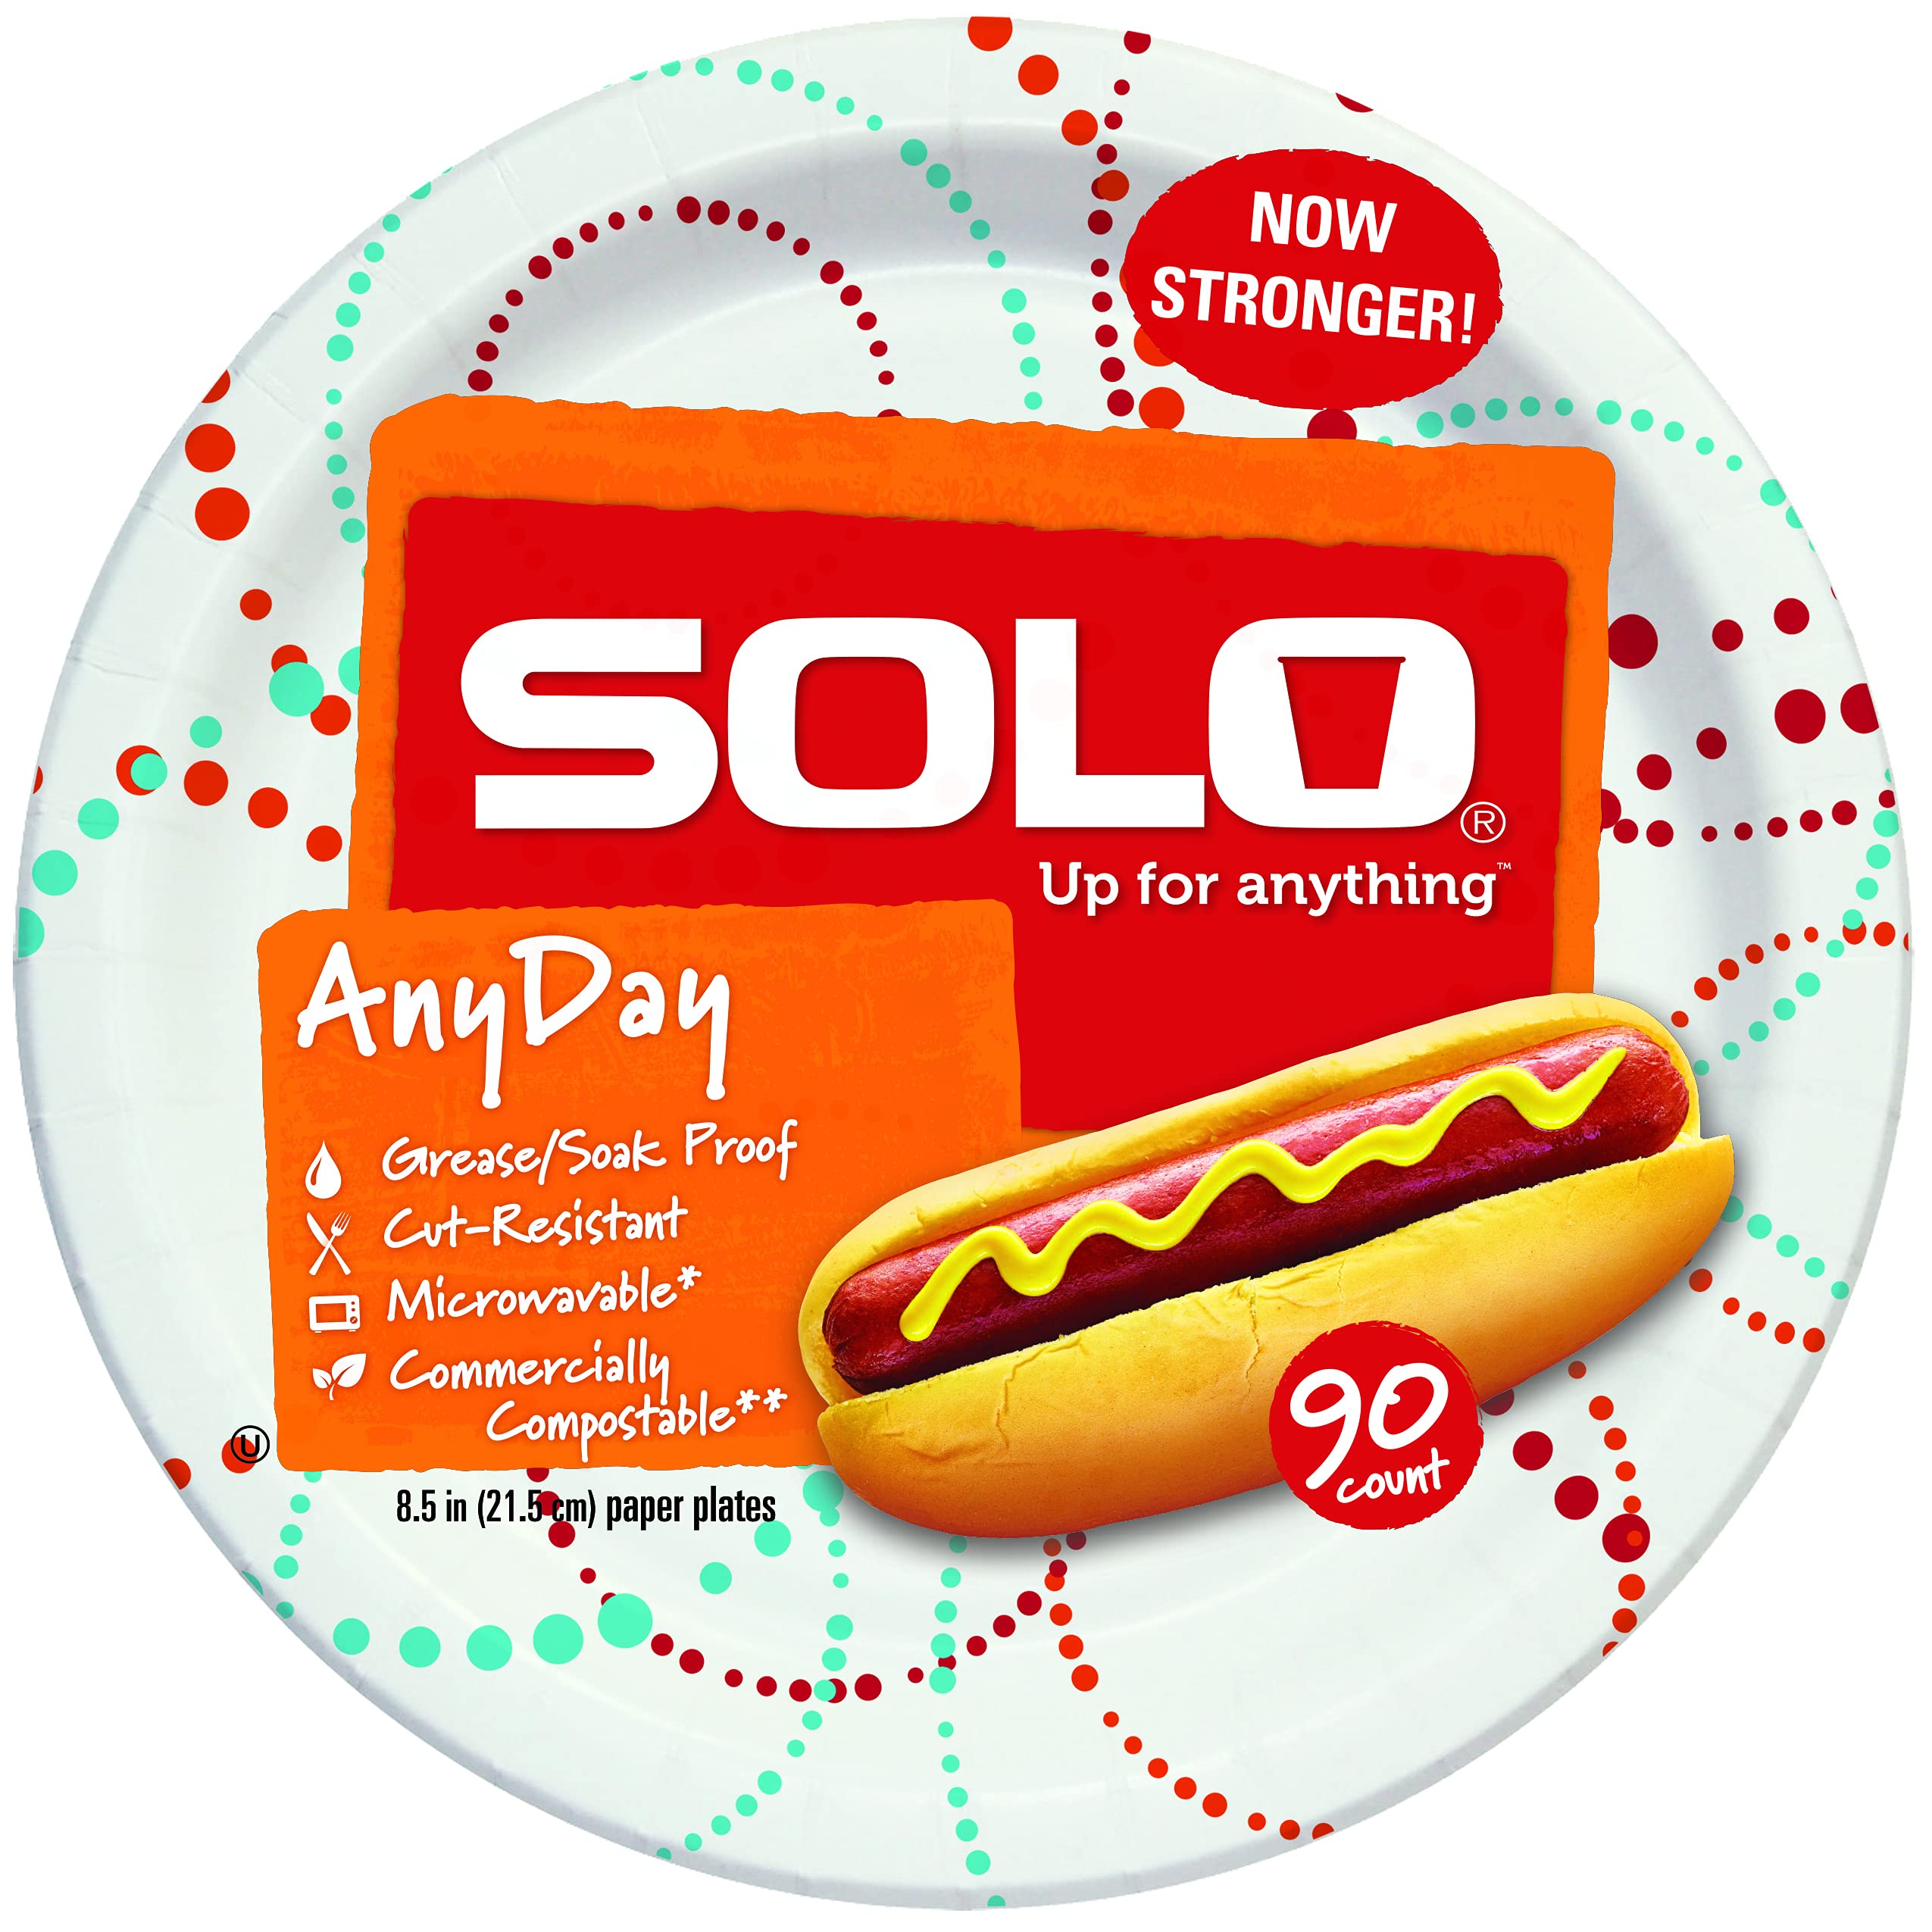 Solo Any Day Paper Plates, 8.5 Inch, Multicolor, 360 Count (Pack of 1)